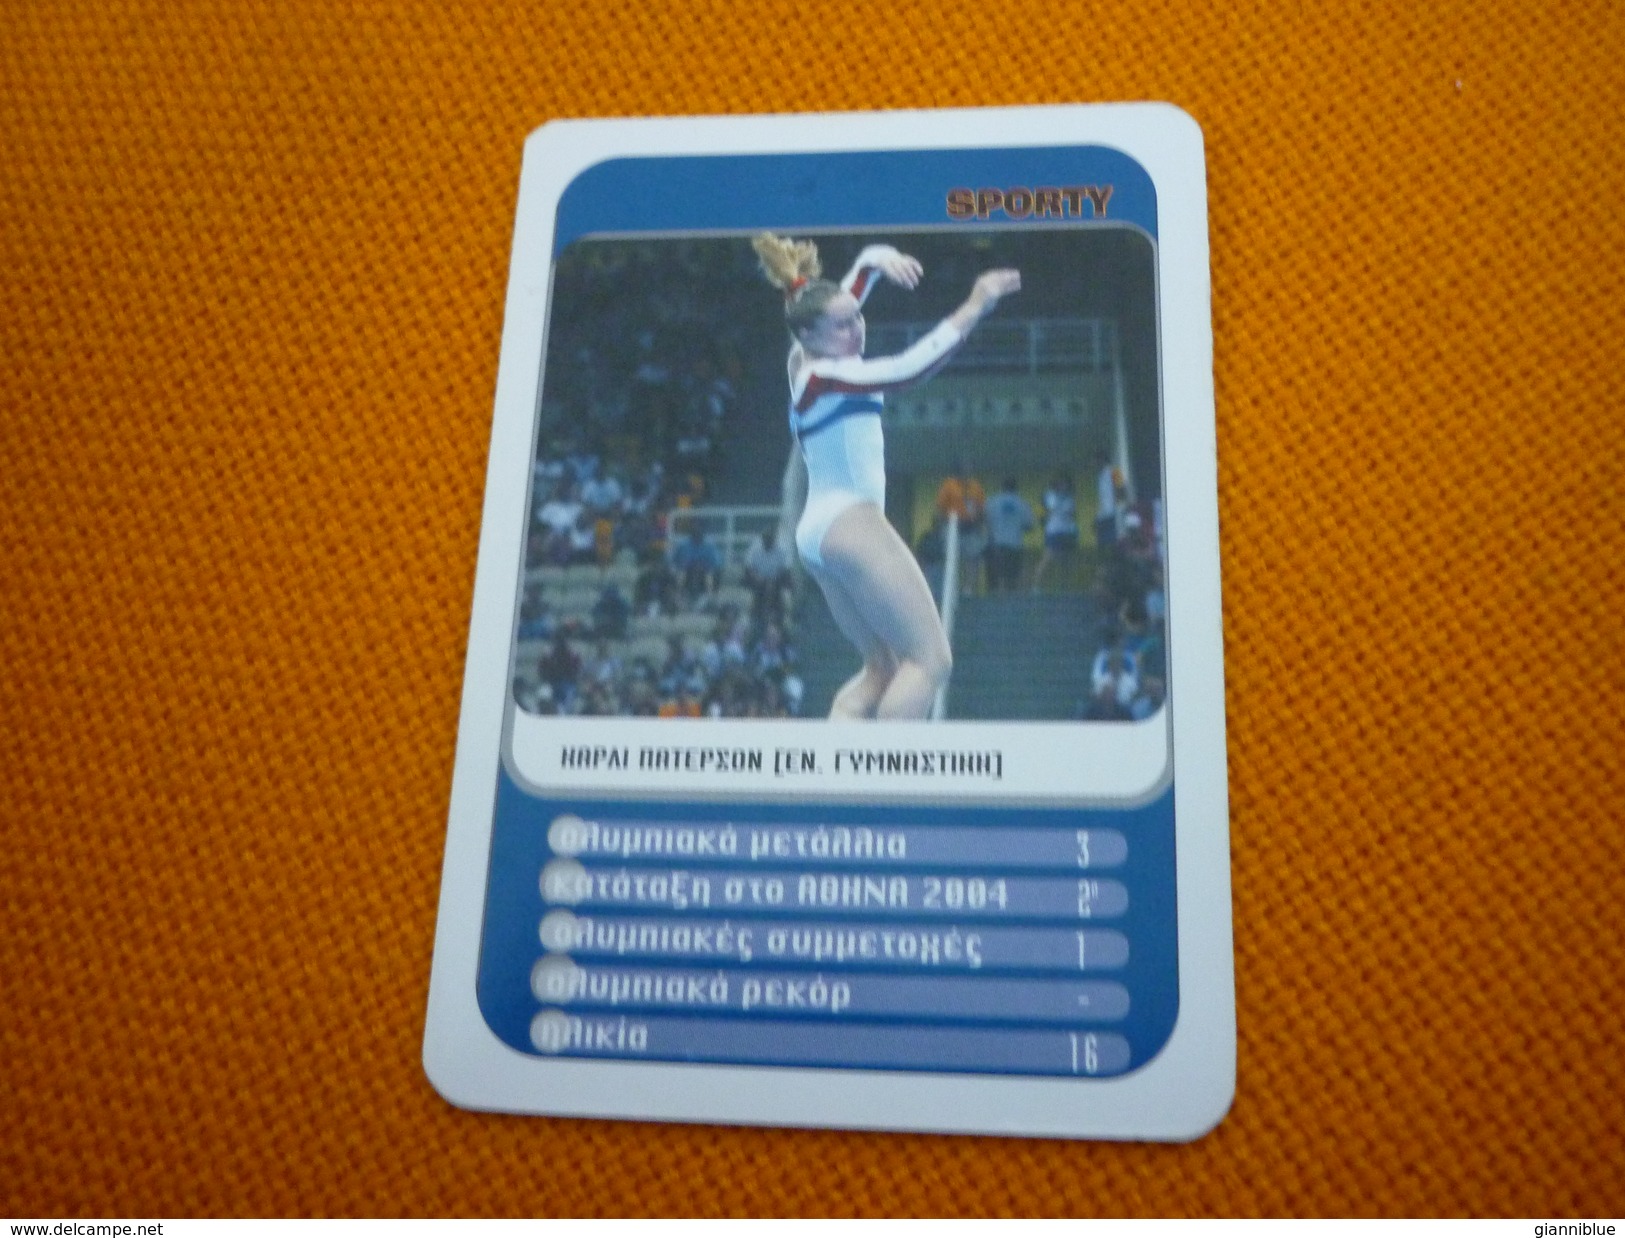 Carly Patterson Rookie American Artistic Gymnast Gymnastics Athens 2004 Olympic Games Medalist Greece Greek Trading Card - Trading Cards